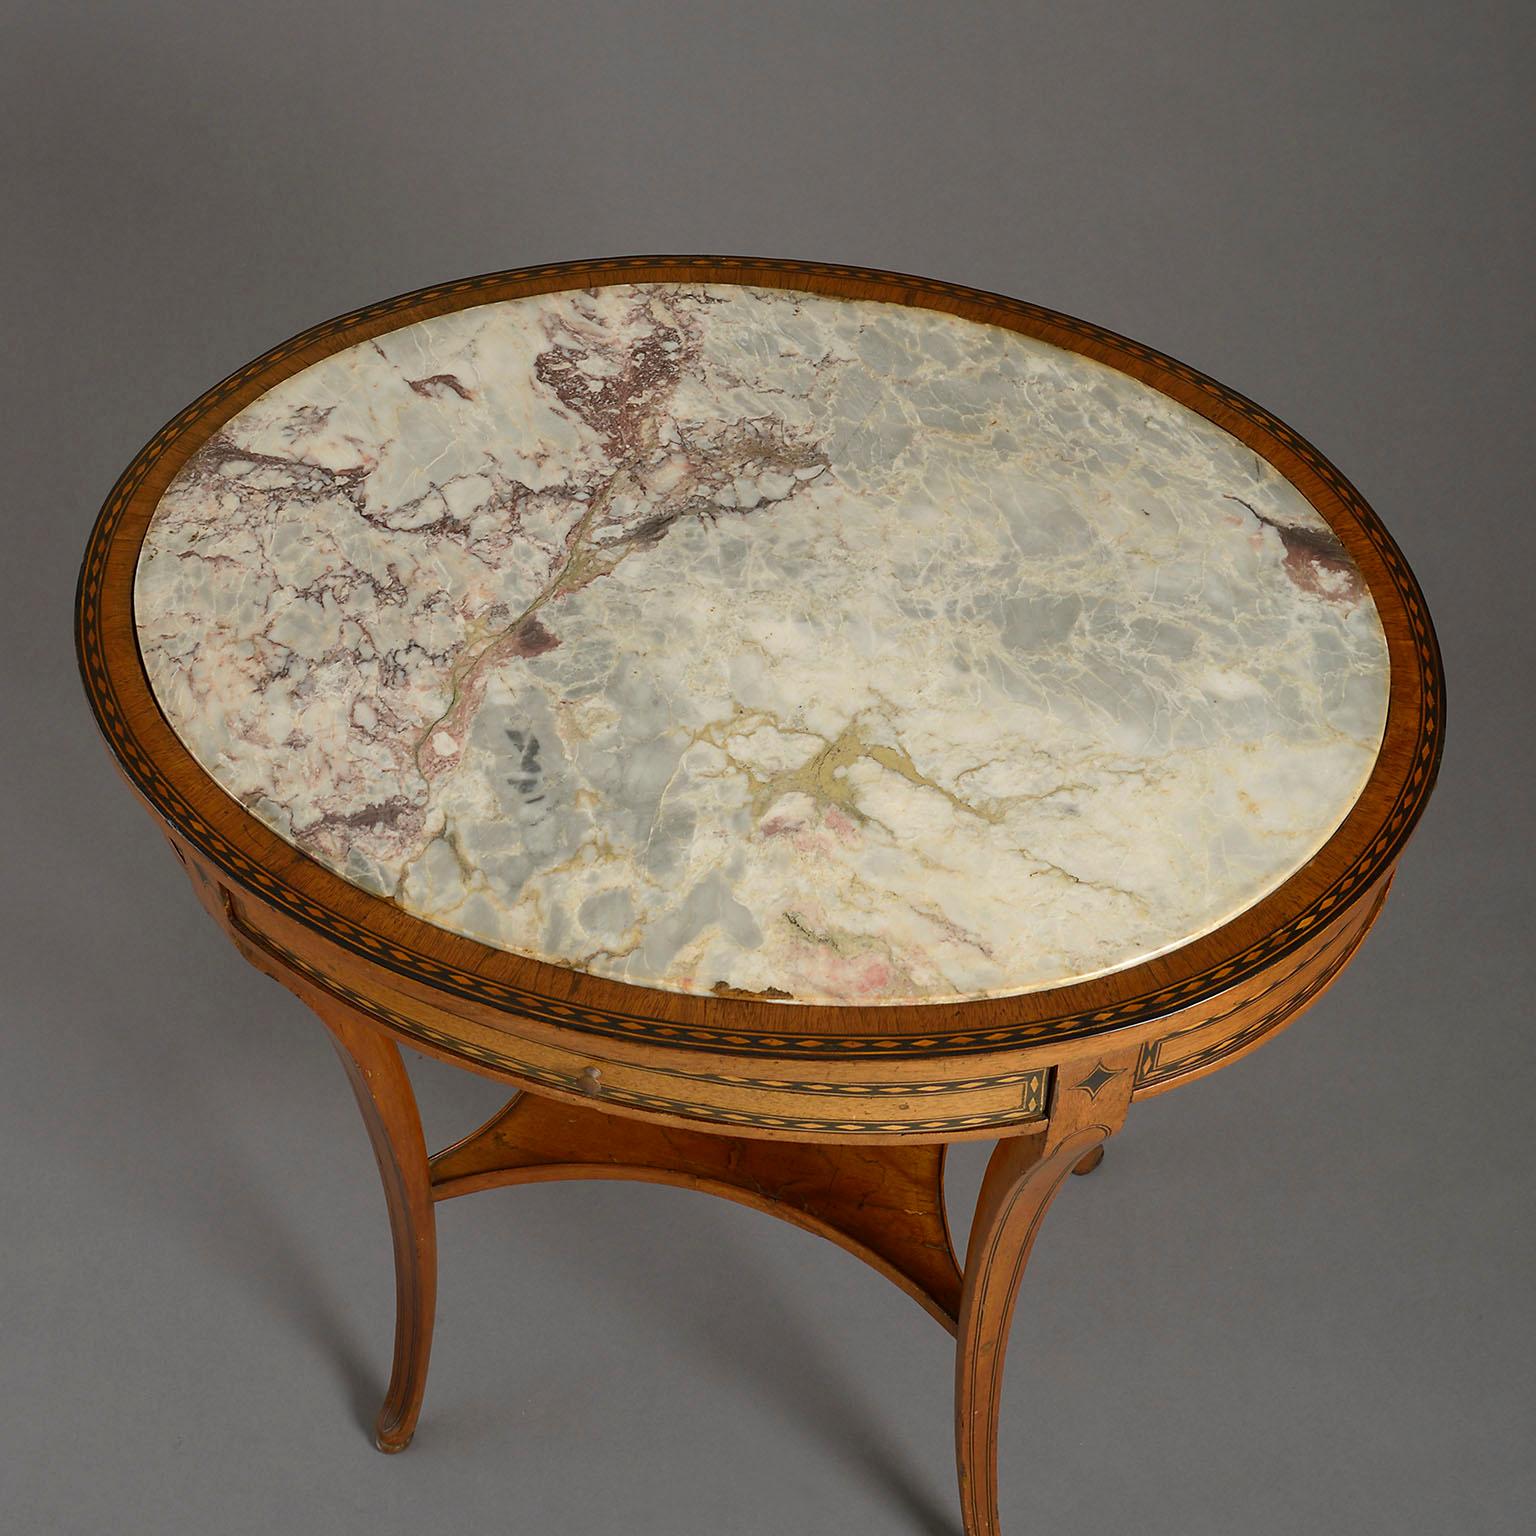 Dutch Early 19th Century Marble-Topped Centre Table